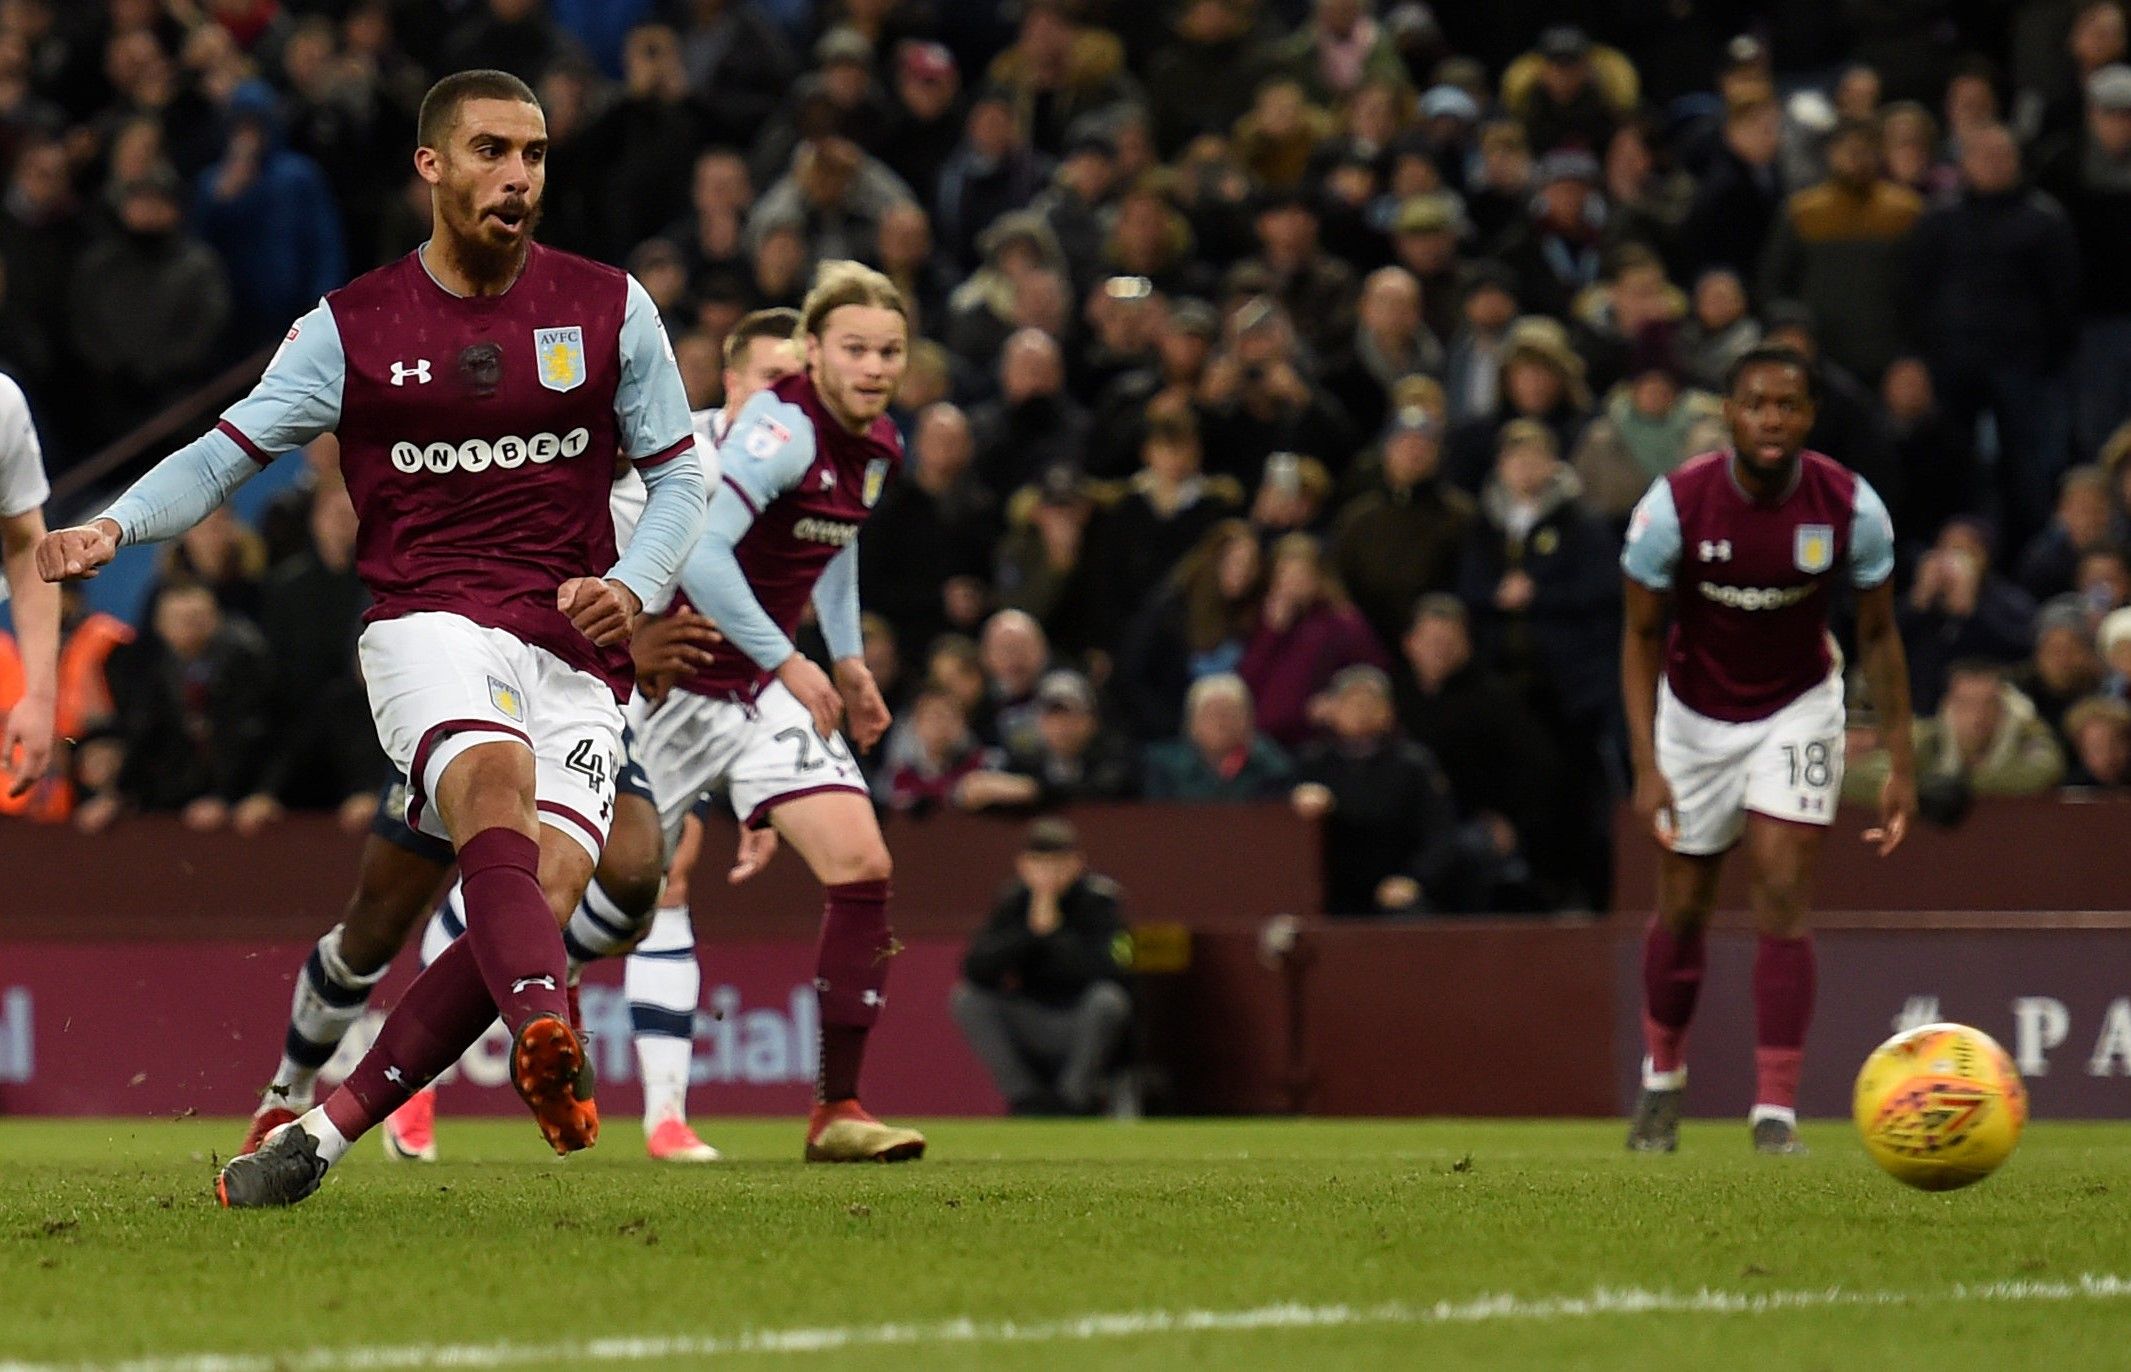 Soccer Football - Championship - Aston Villa vs Preston North End - Villa Park, Birmingham, Britain - February 20, 2018  Aston Villa's Lewis Grabban scores their first goal from the penalty spot  Action Images/Adam Holt  EDITORIAL USE ONLY. No use with unauthorized audio, video, data, fixture lists, club/league logos or 